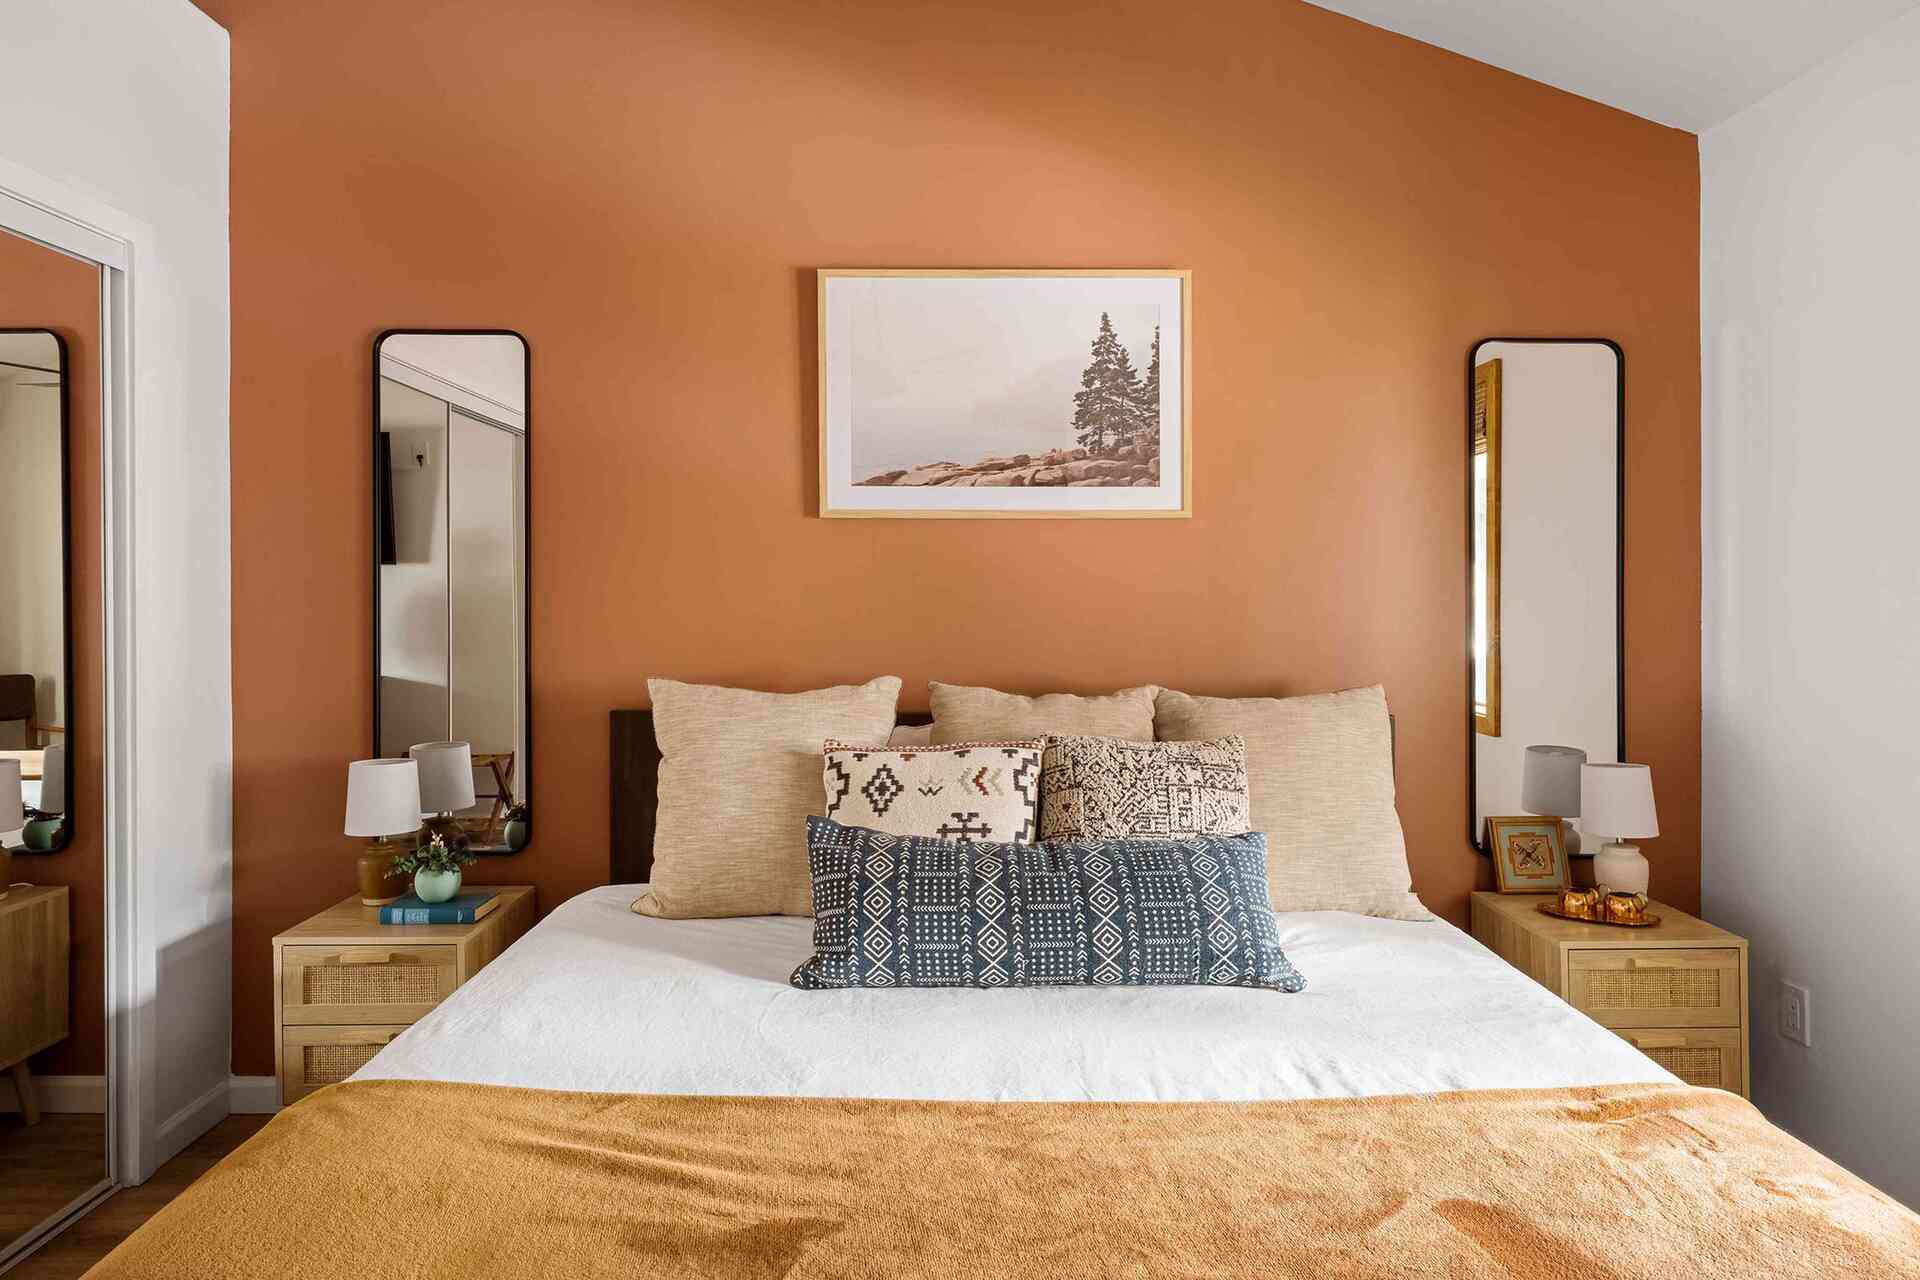 Bedroom Accent Wall Paint Ideas: 12 Ways To Add Style And Impact